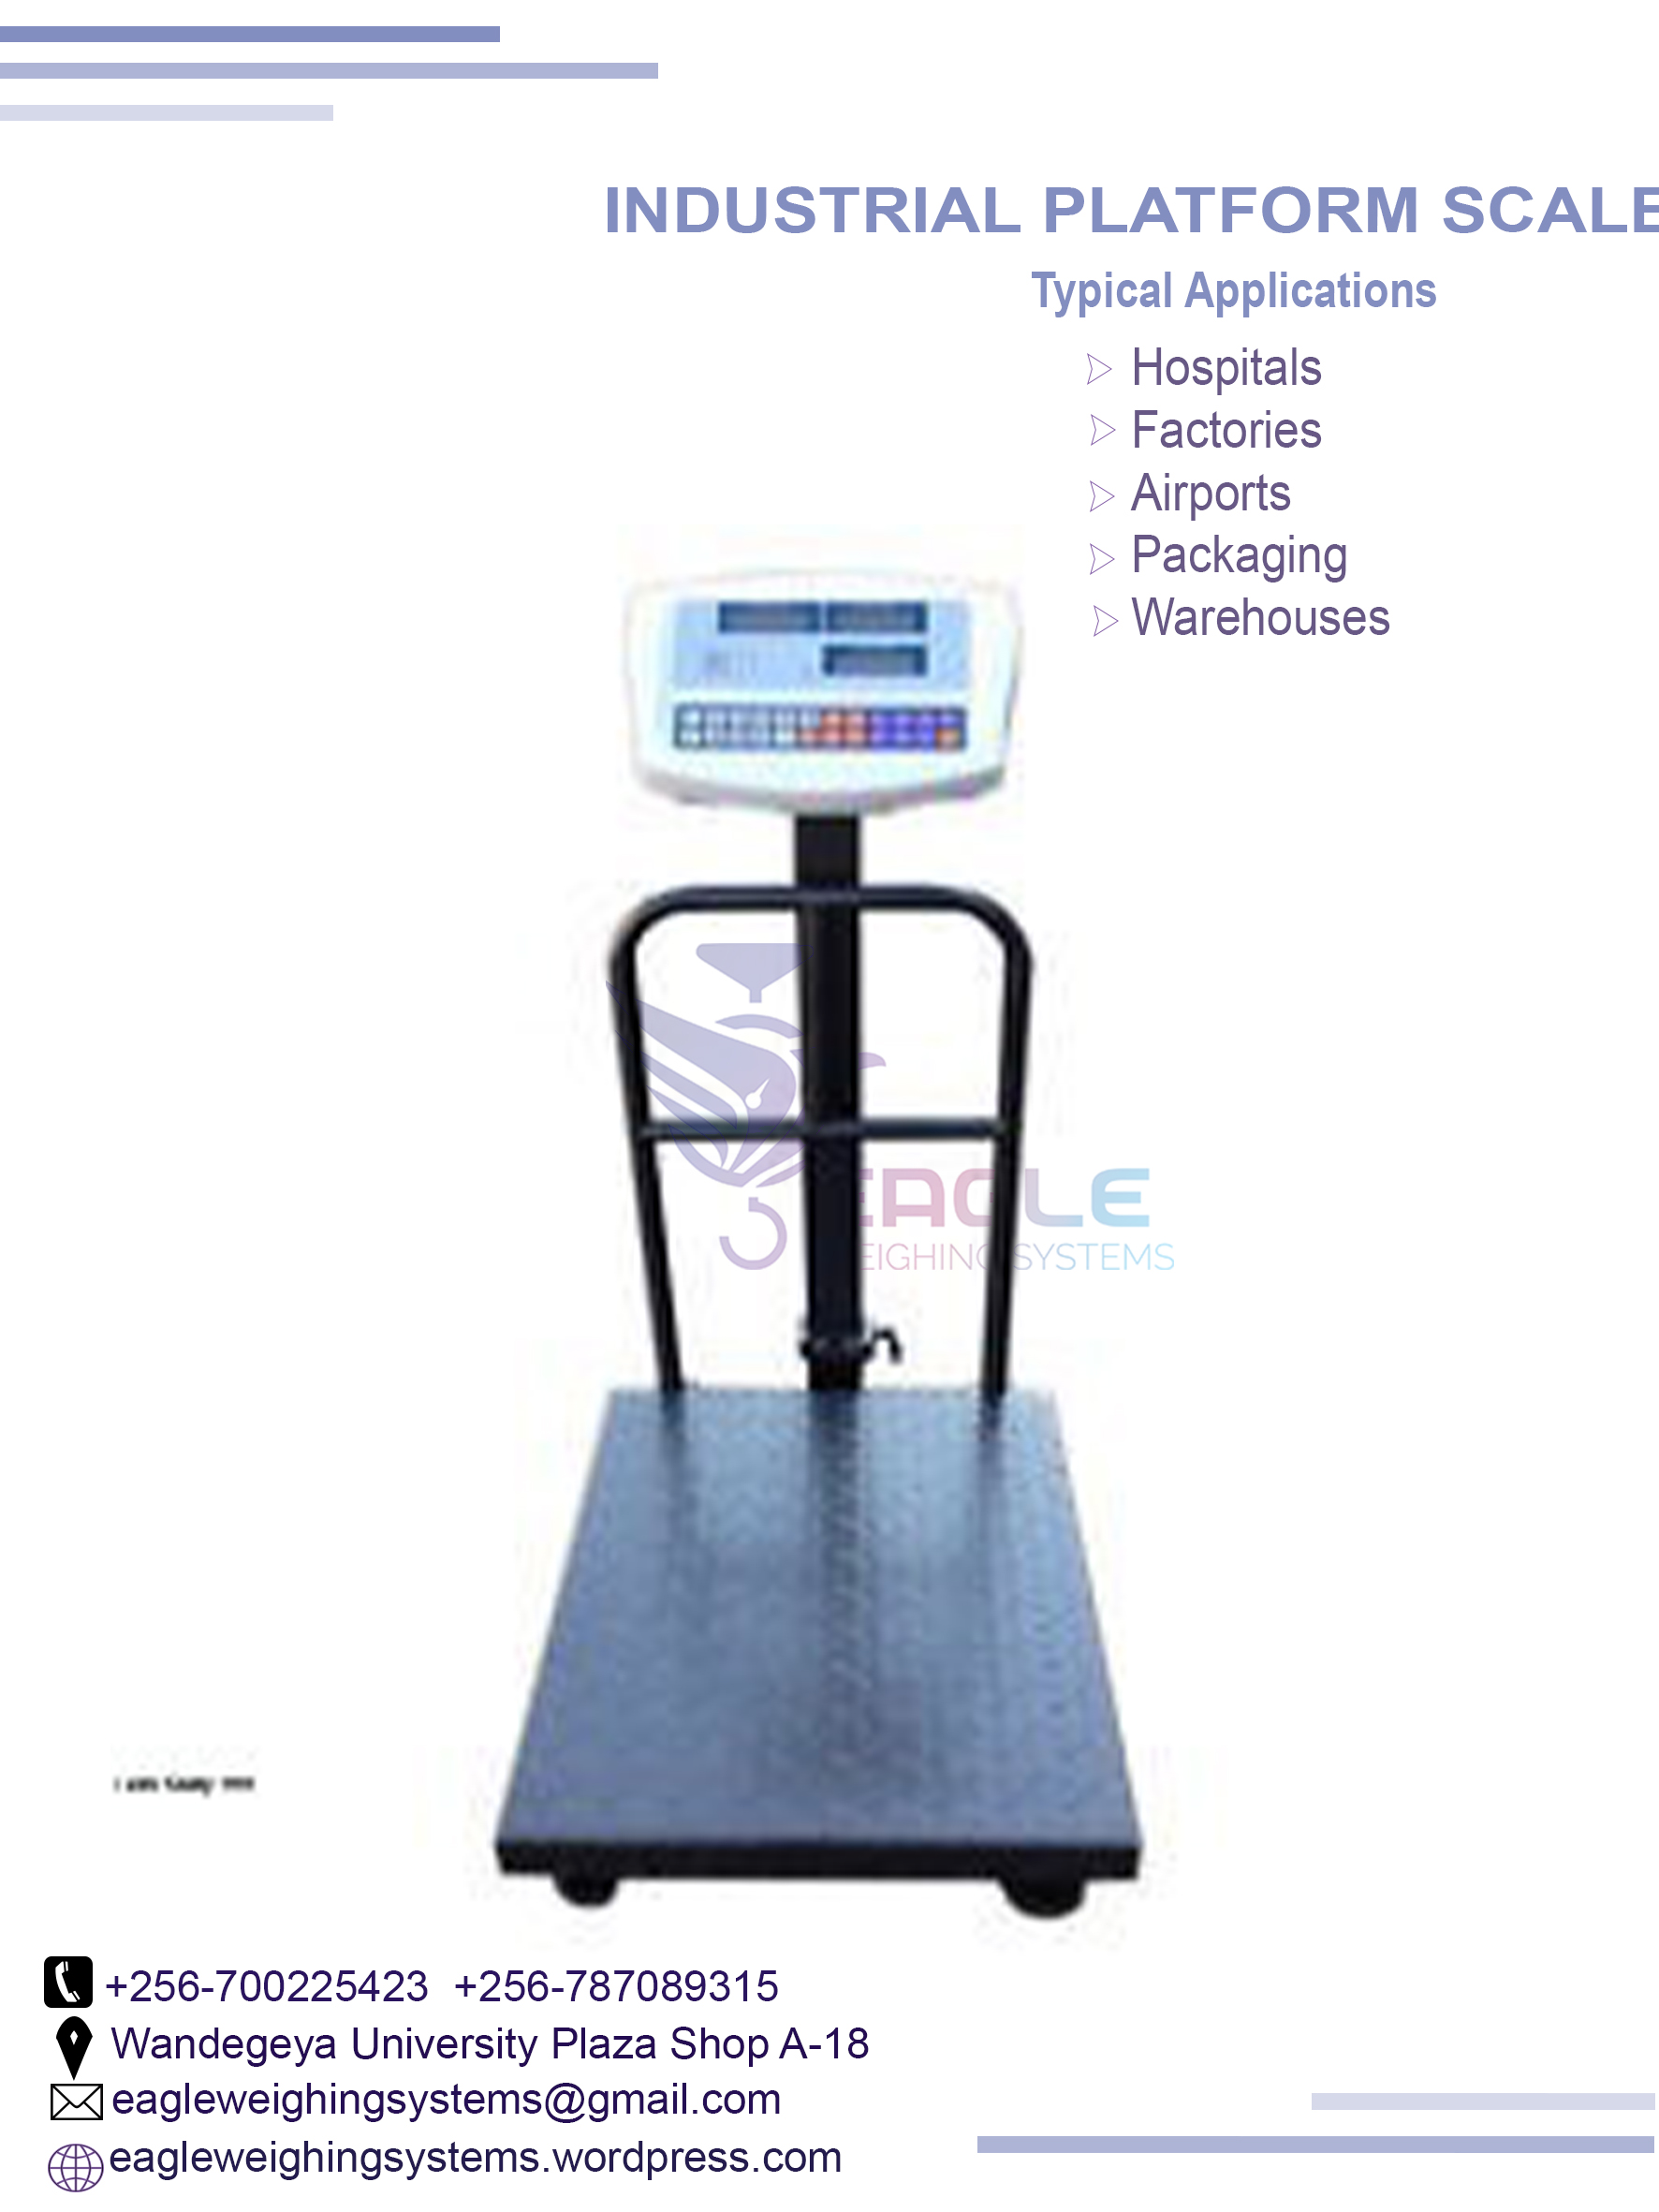 Rechargeable Balanza Industrial Portable Digital Weighing Scales Manufacturer, Kampala Central Division, Central, Uganda